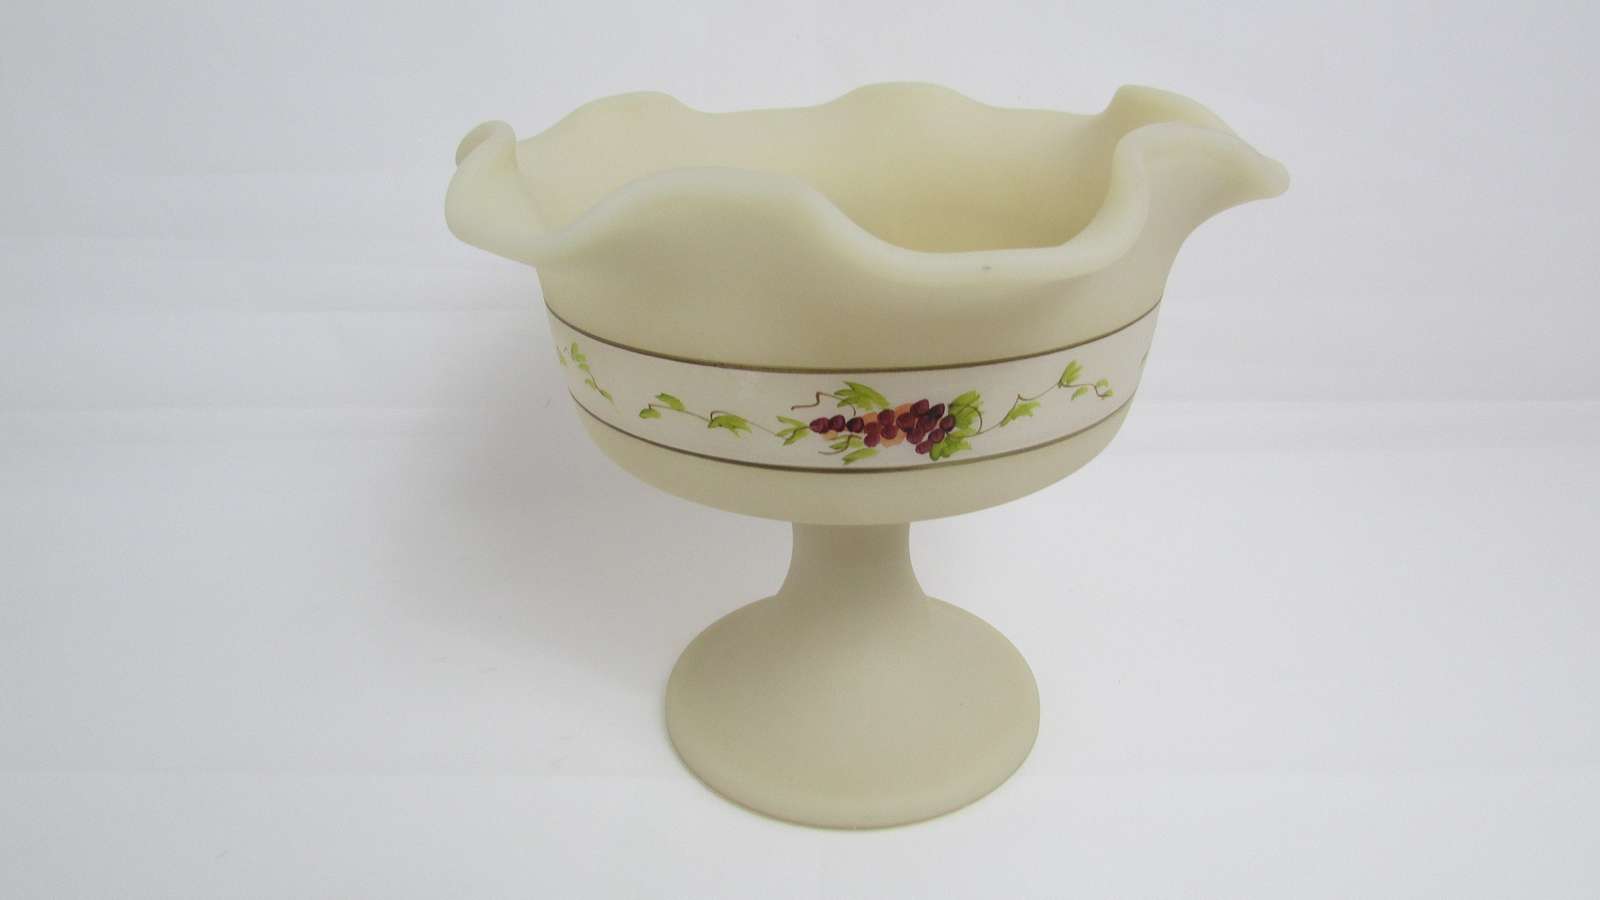 Vintage Fenton Satin Custard Glass Compote  Hand Painted. Grape Clusters. Beige  - $30.00